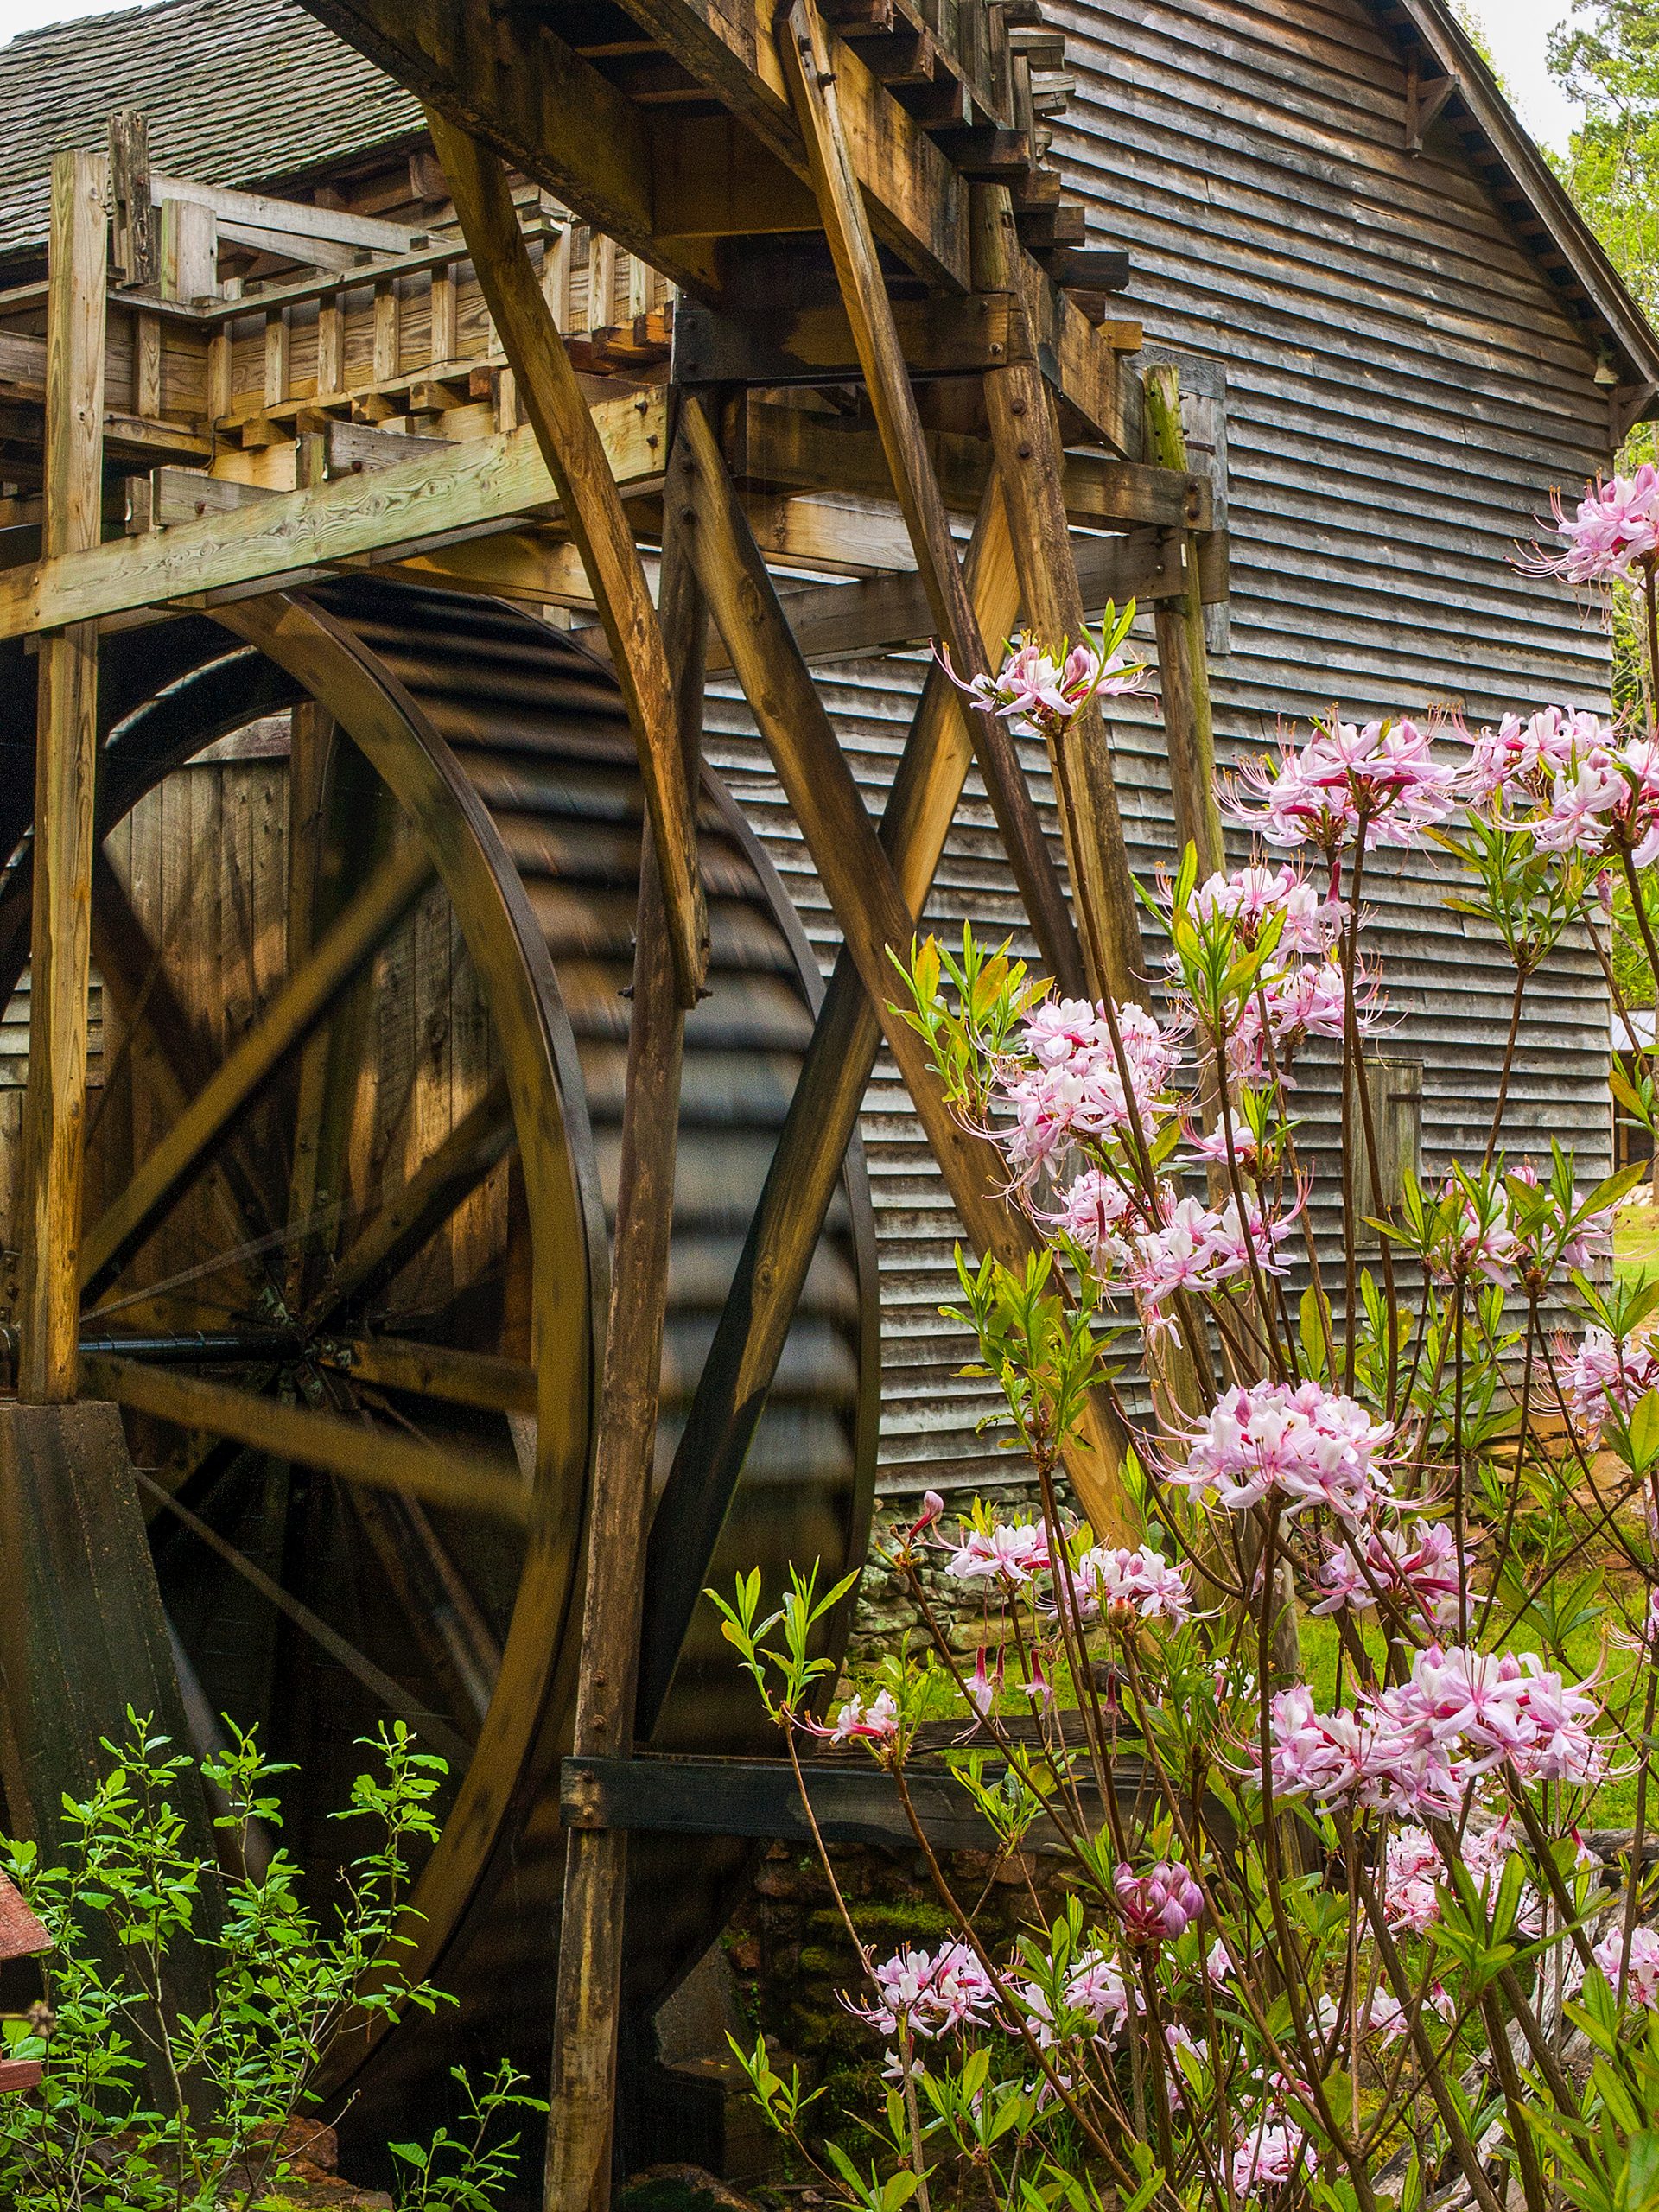 South Carolina’s largest wooden waterwheel still turns at Haygood Mill, located outside of Easley. The mill produces grits and flour available for sale on certain weekends each month.